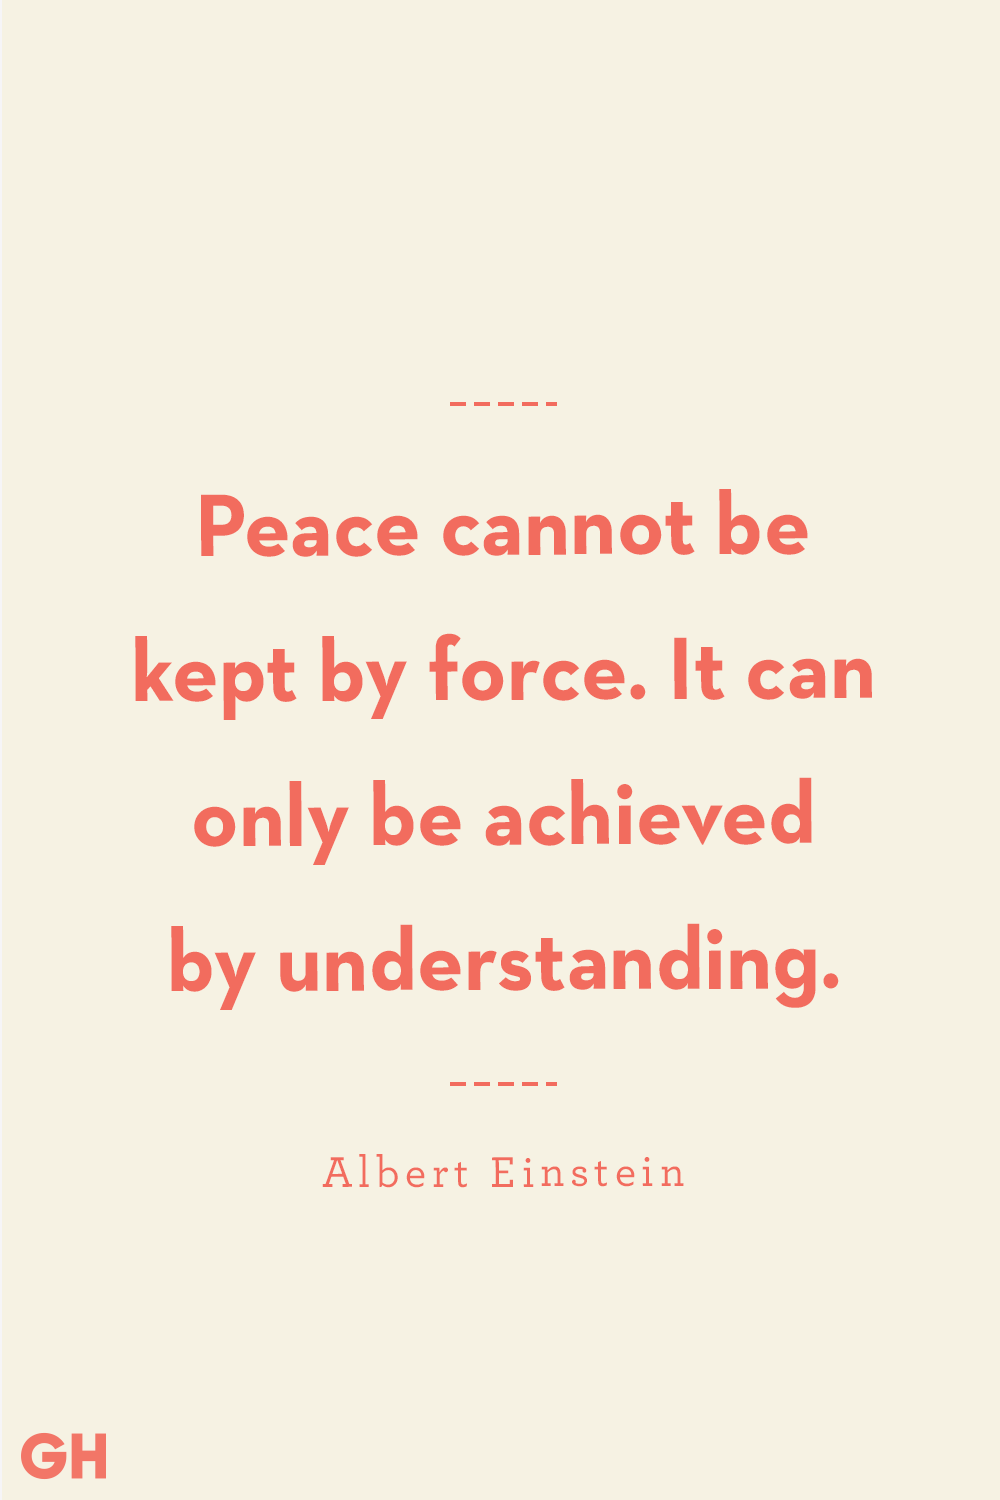 30 Best Peace Quotes - Quotes and Sayings About Peace and Tranquility